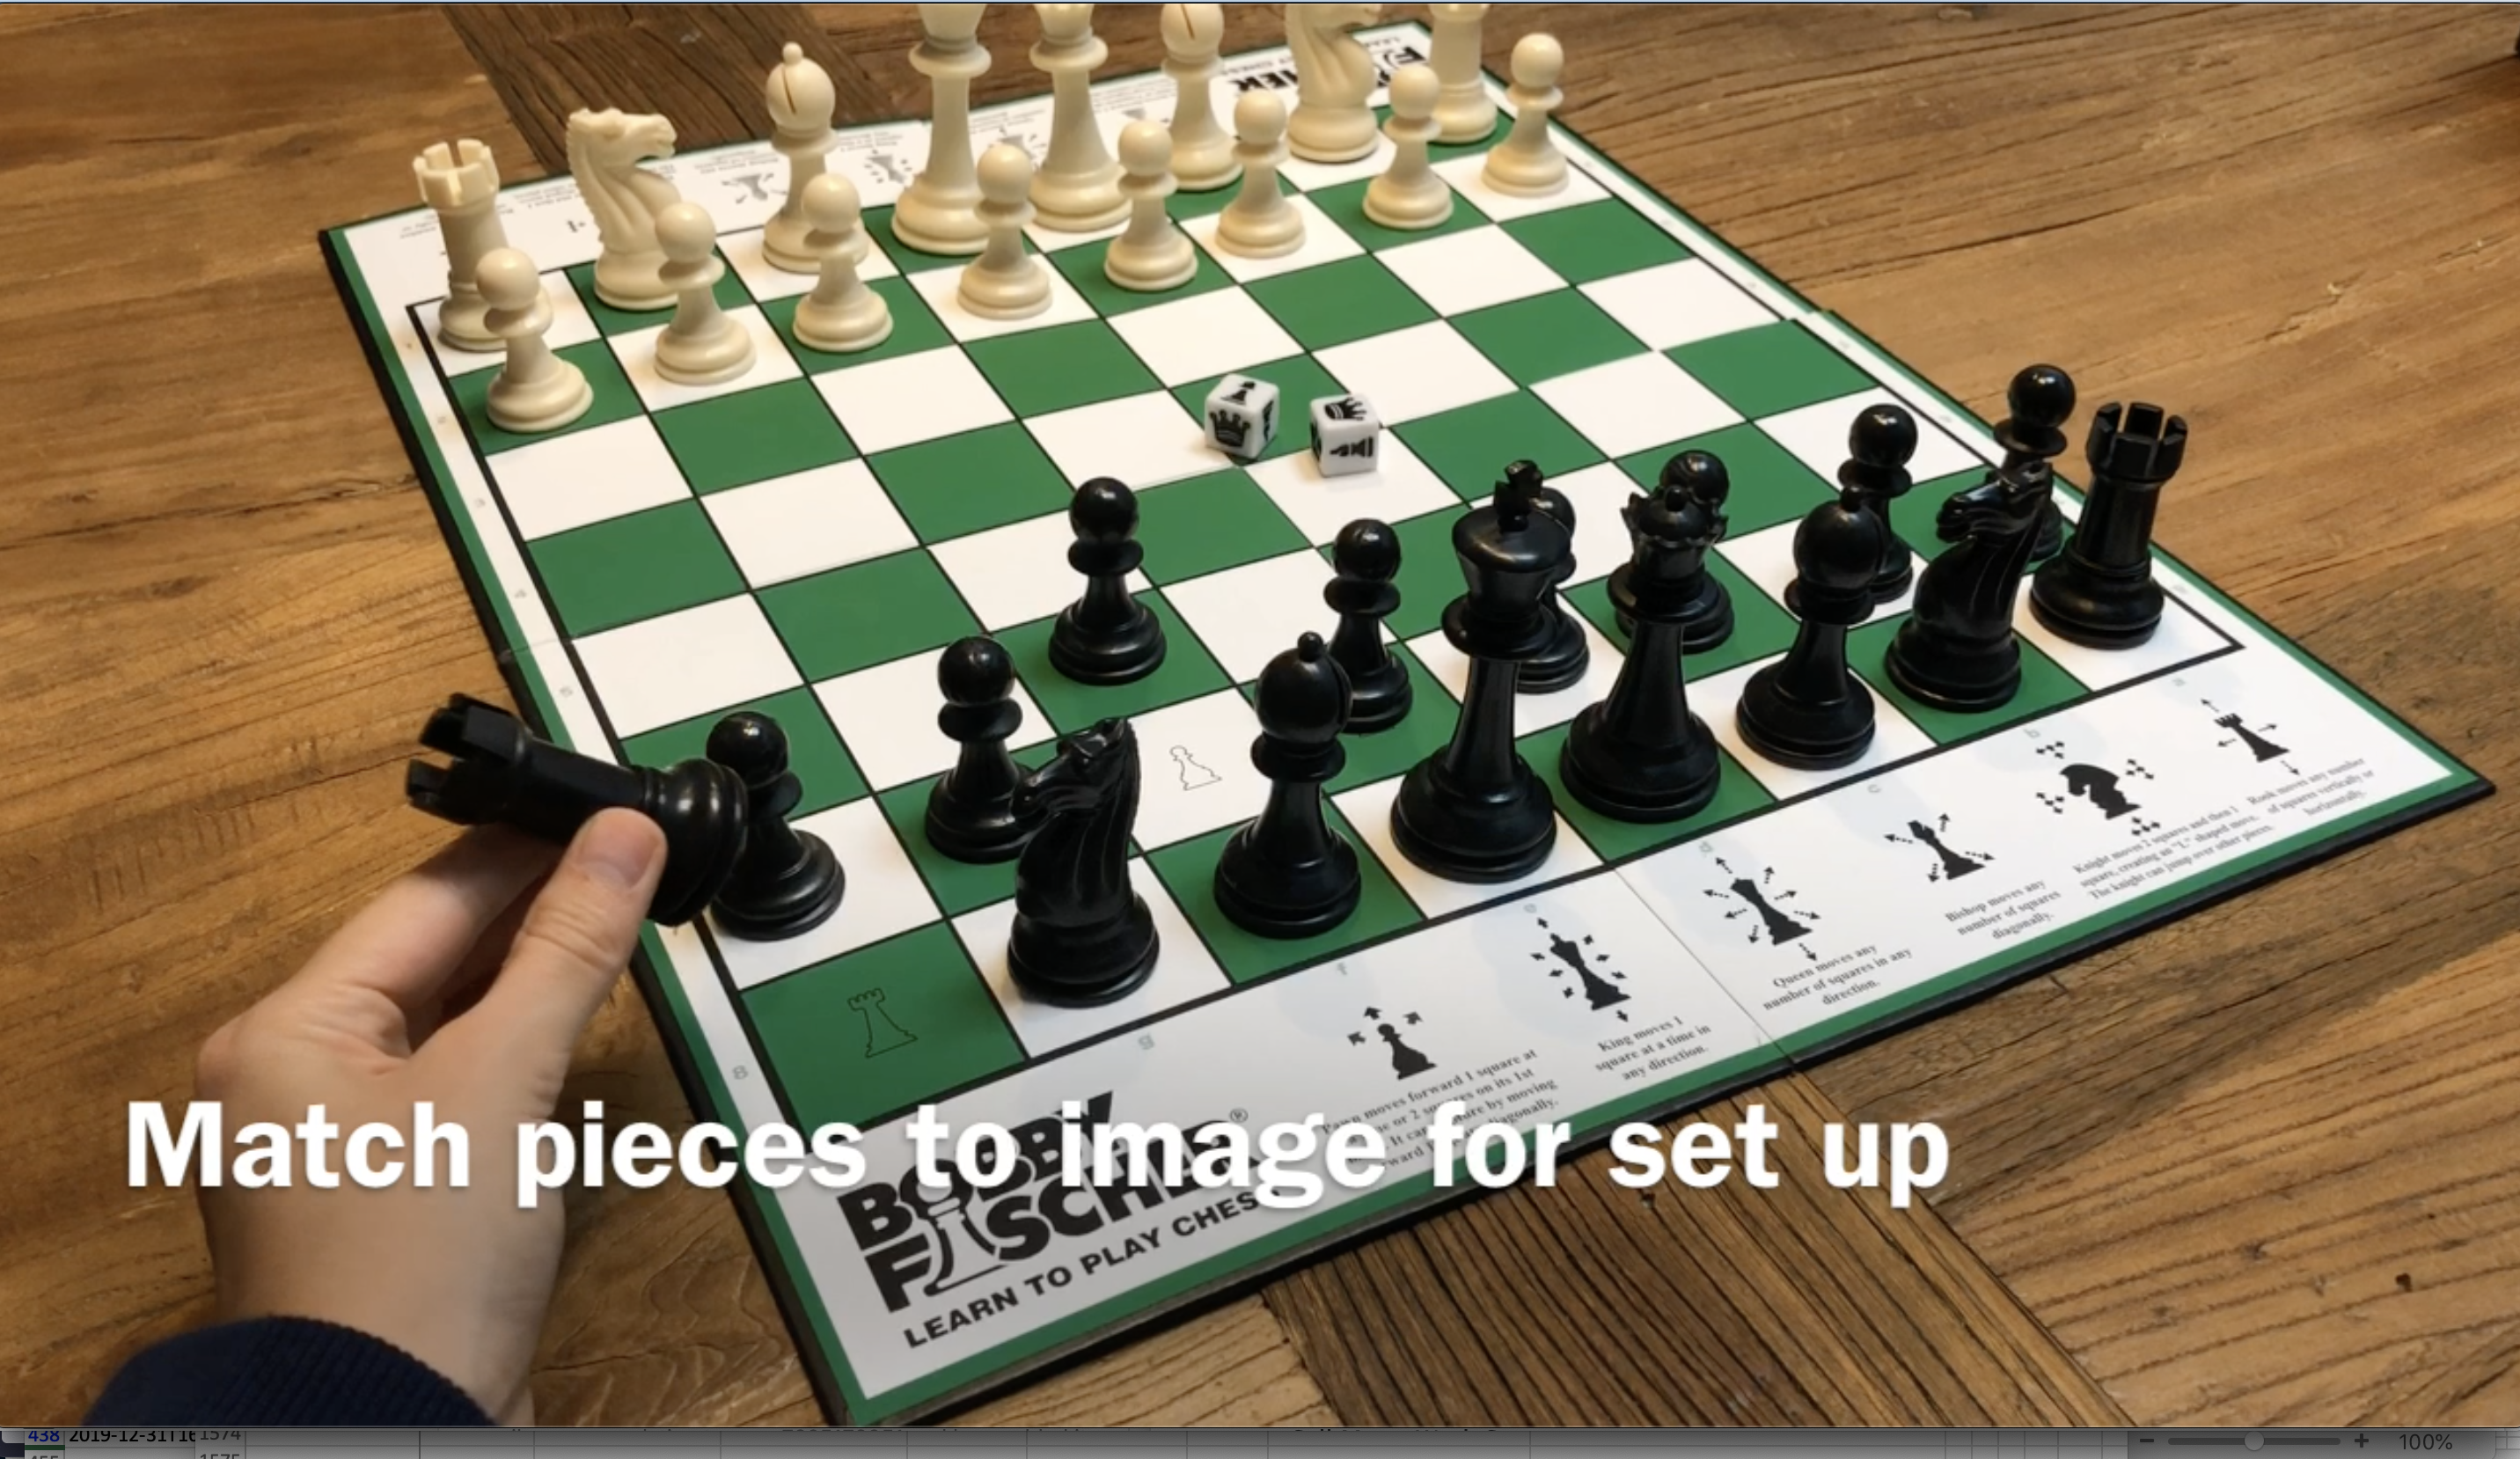 What are the Values of these Chess Pieces? - TeachableMath